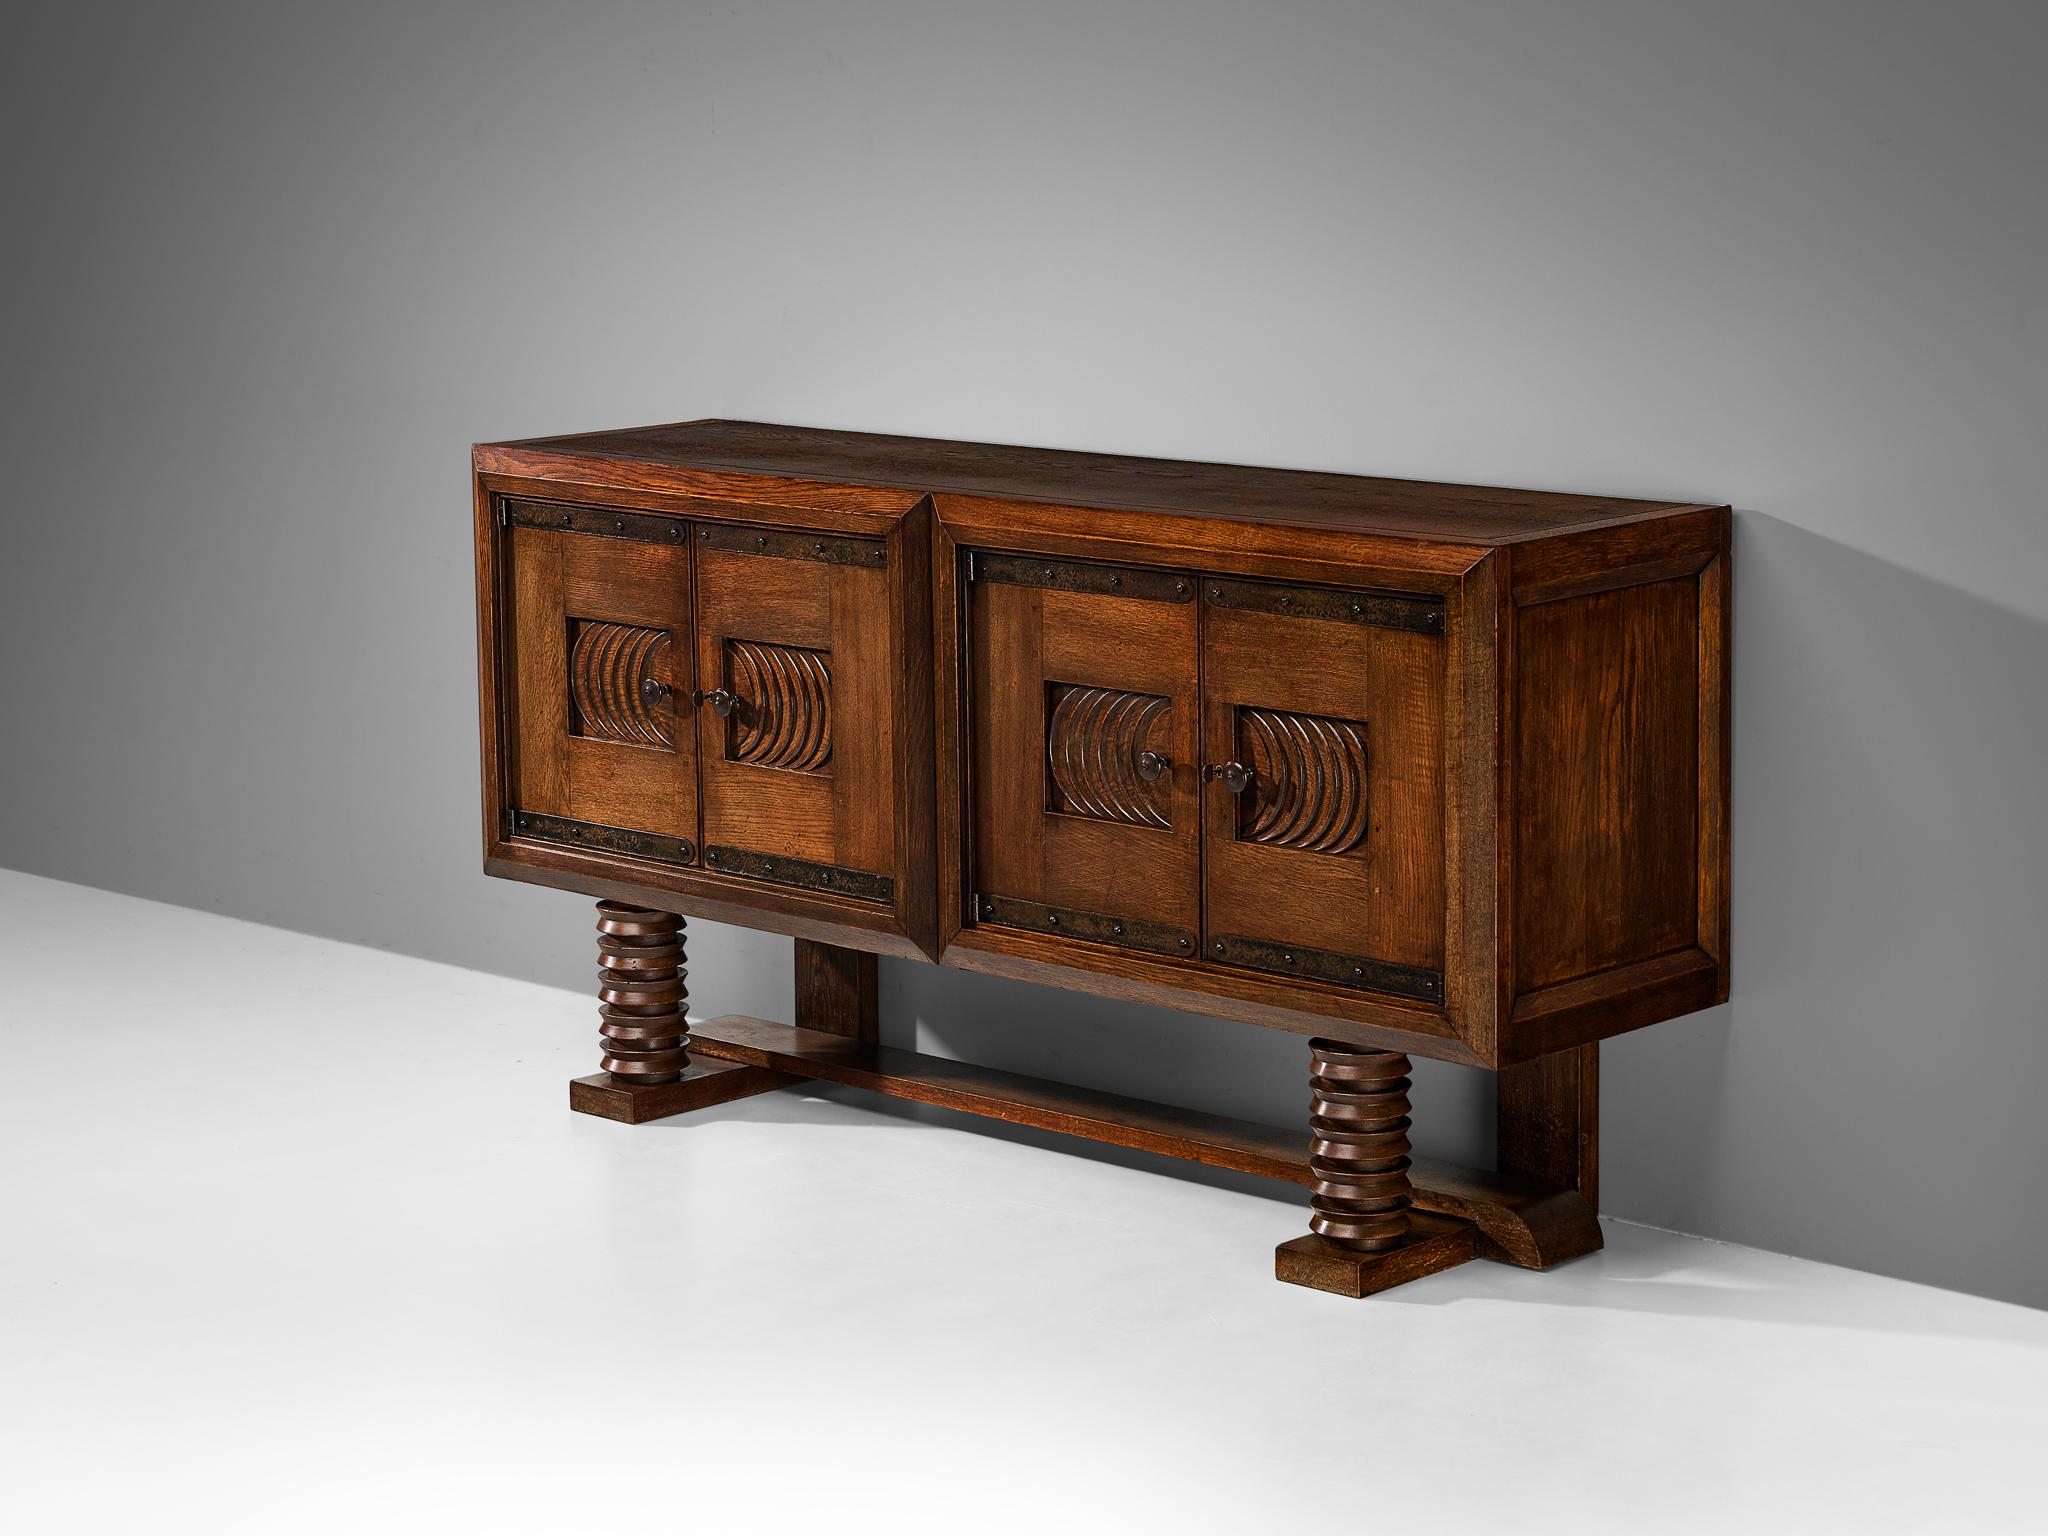 Georges & Gaston Guérin, sideboard, solid oak, iron, Paris, France, 1930s/40s

Made in Paris, this sideboard is designed according to the French Art Deco design principles that rose to prominence in the 1930s and 1940s. This credenza clearly shows